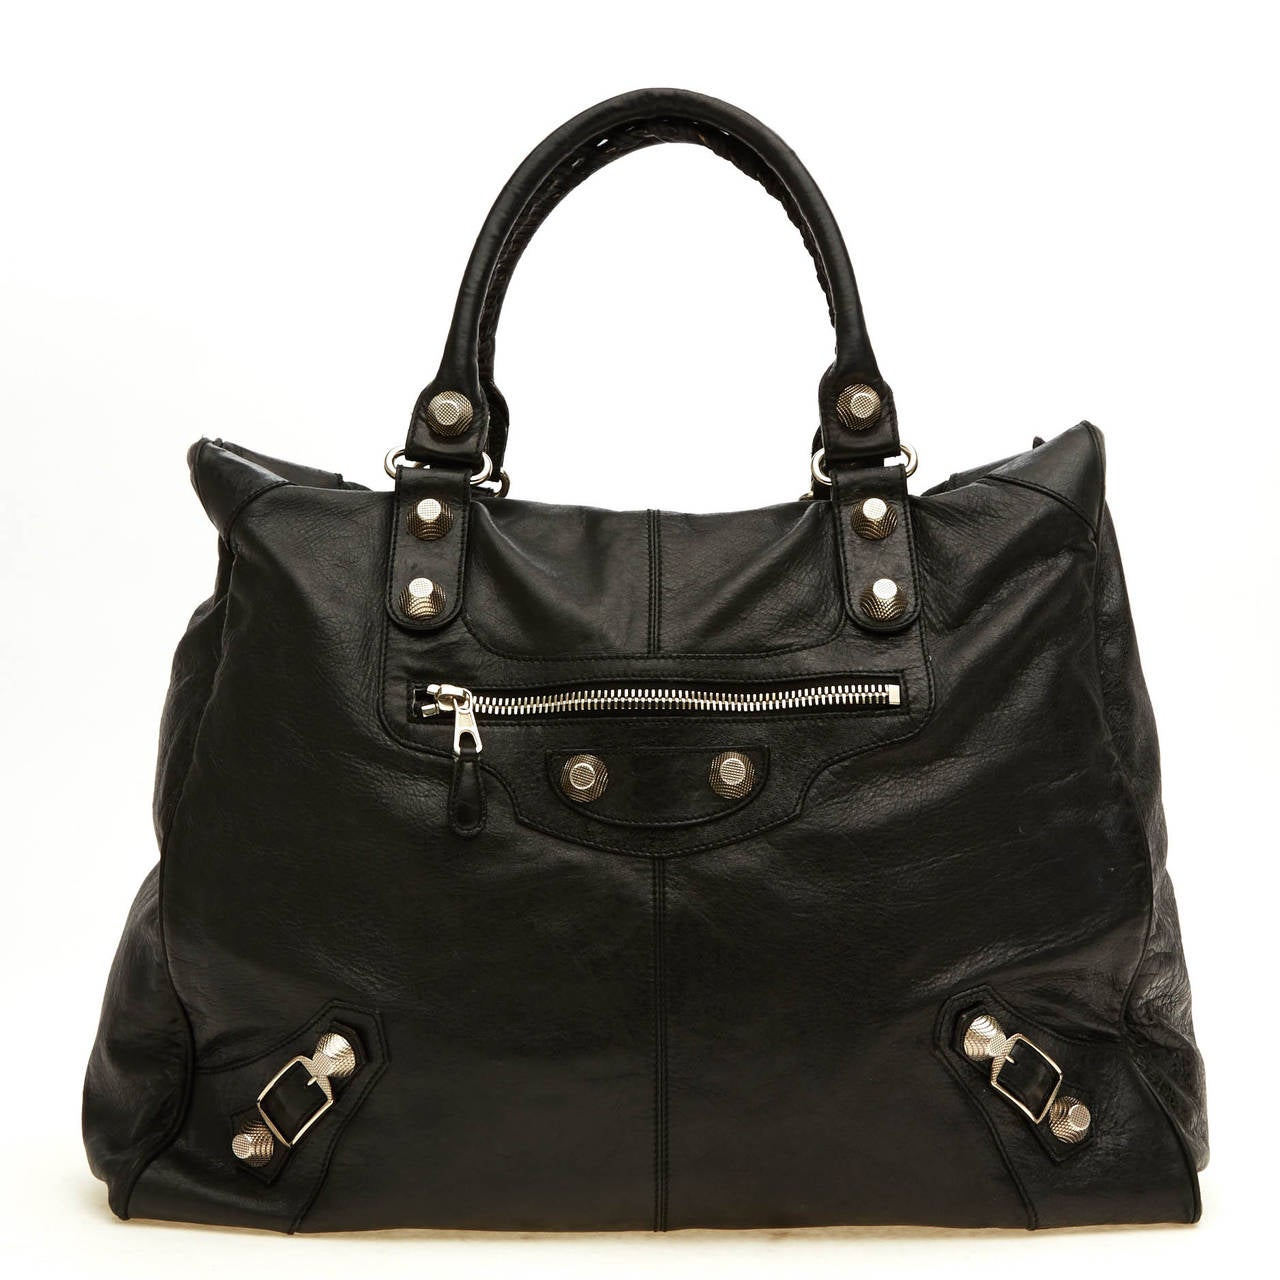 This stunning Balenciaga Weekender with Giant Studs is an instant luxurious classic. This desirable bag, constructed with soft deep black leather, features giant silver hardware and zipper details. This bag is very spacious, yet east to carry - it